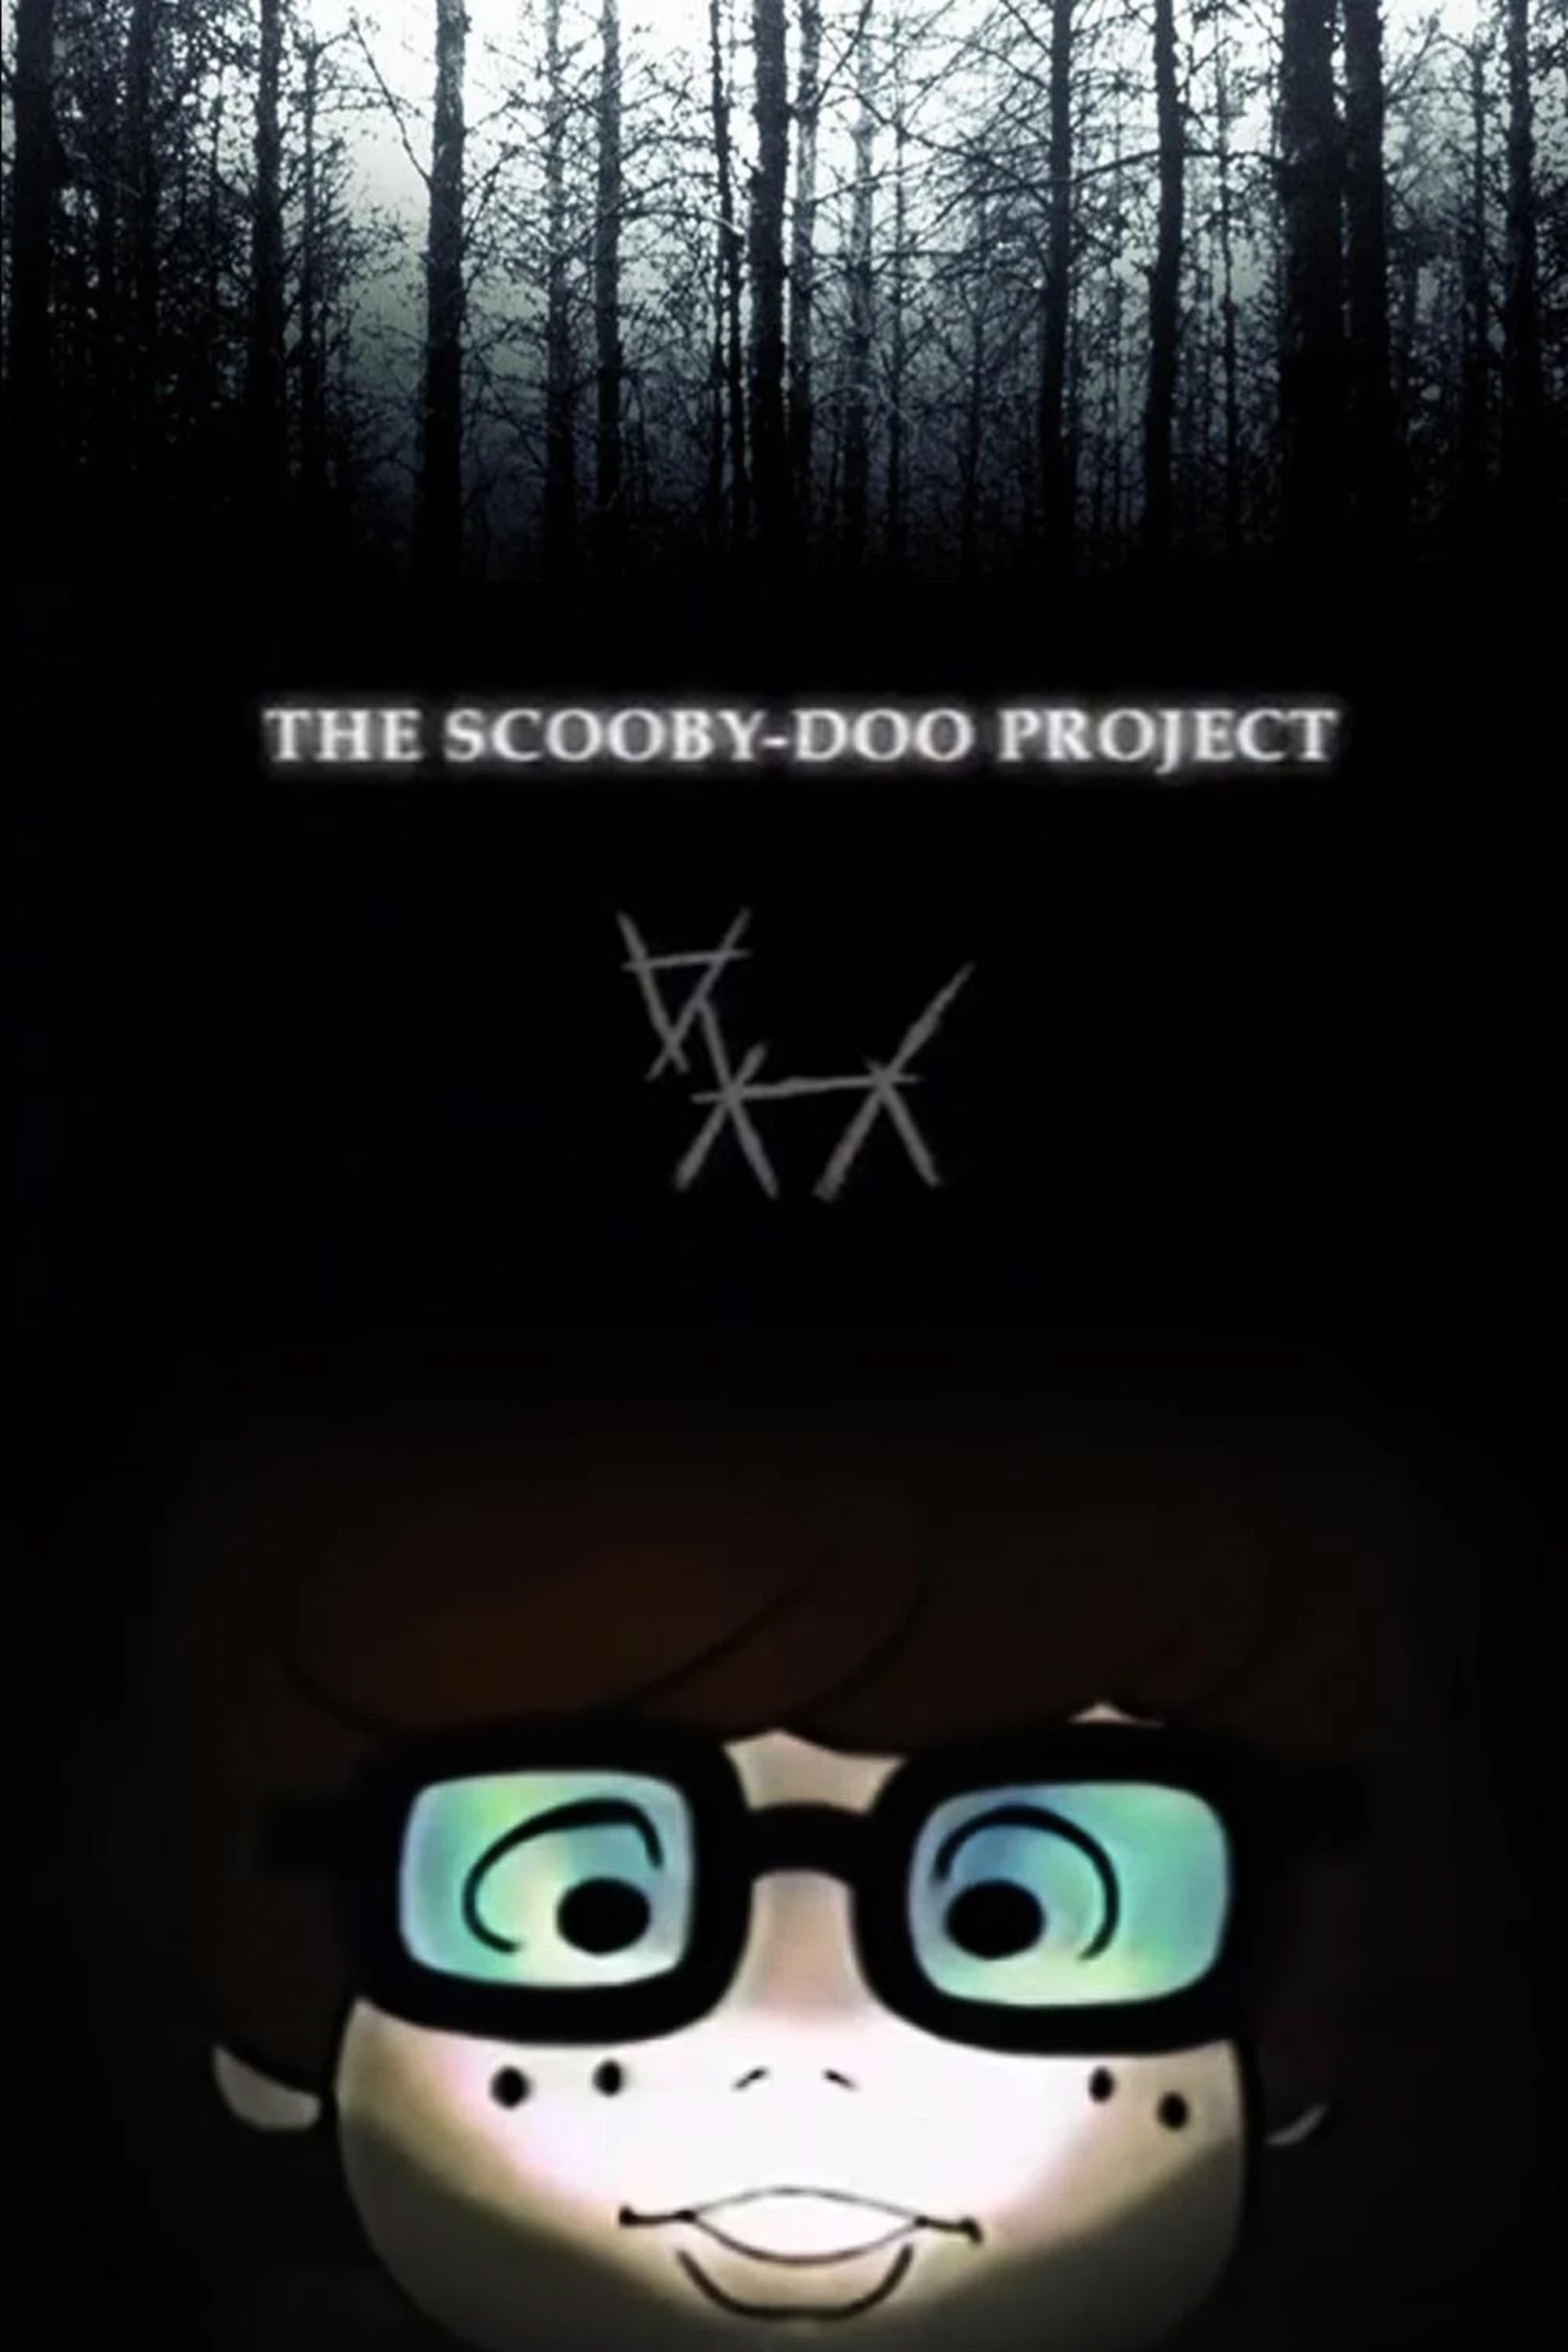 The Scooby-Doo Project poster